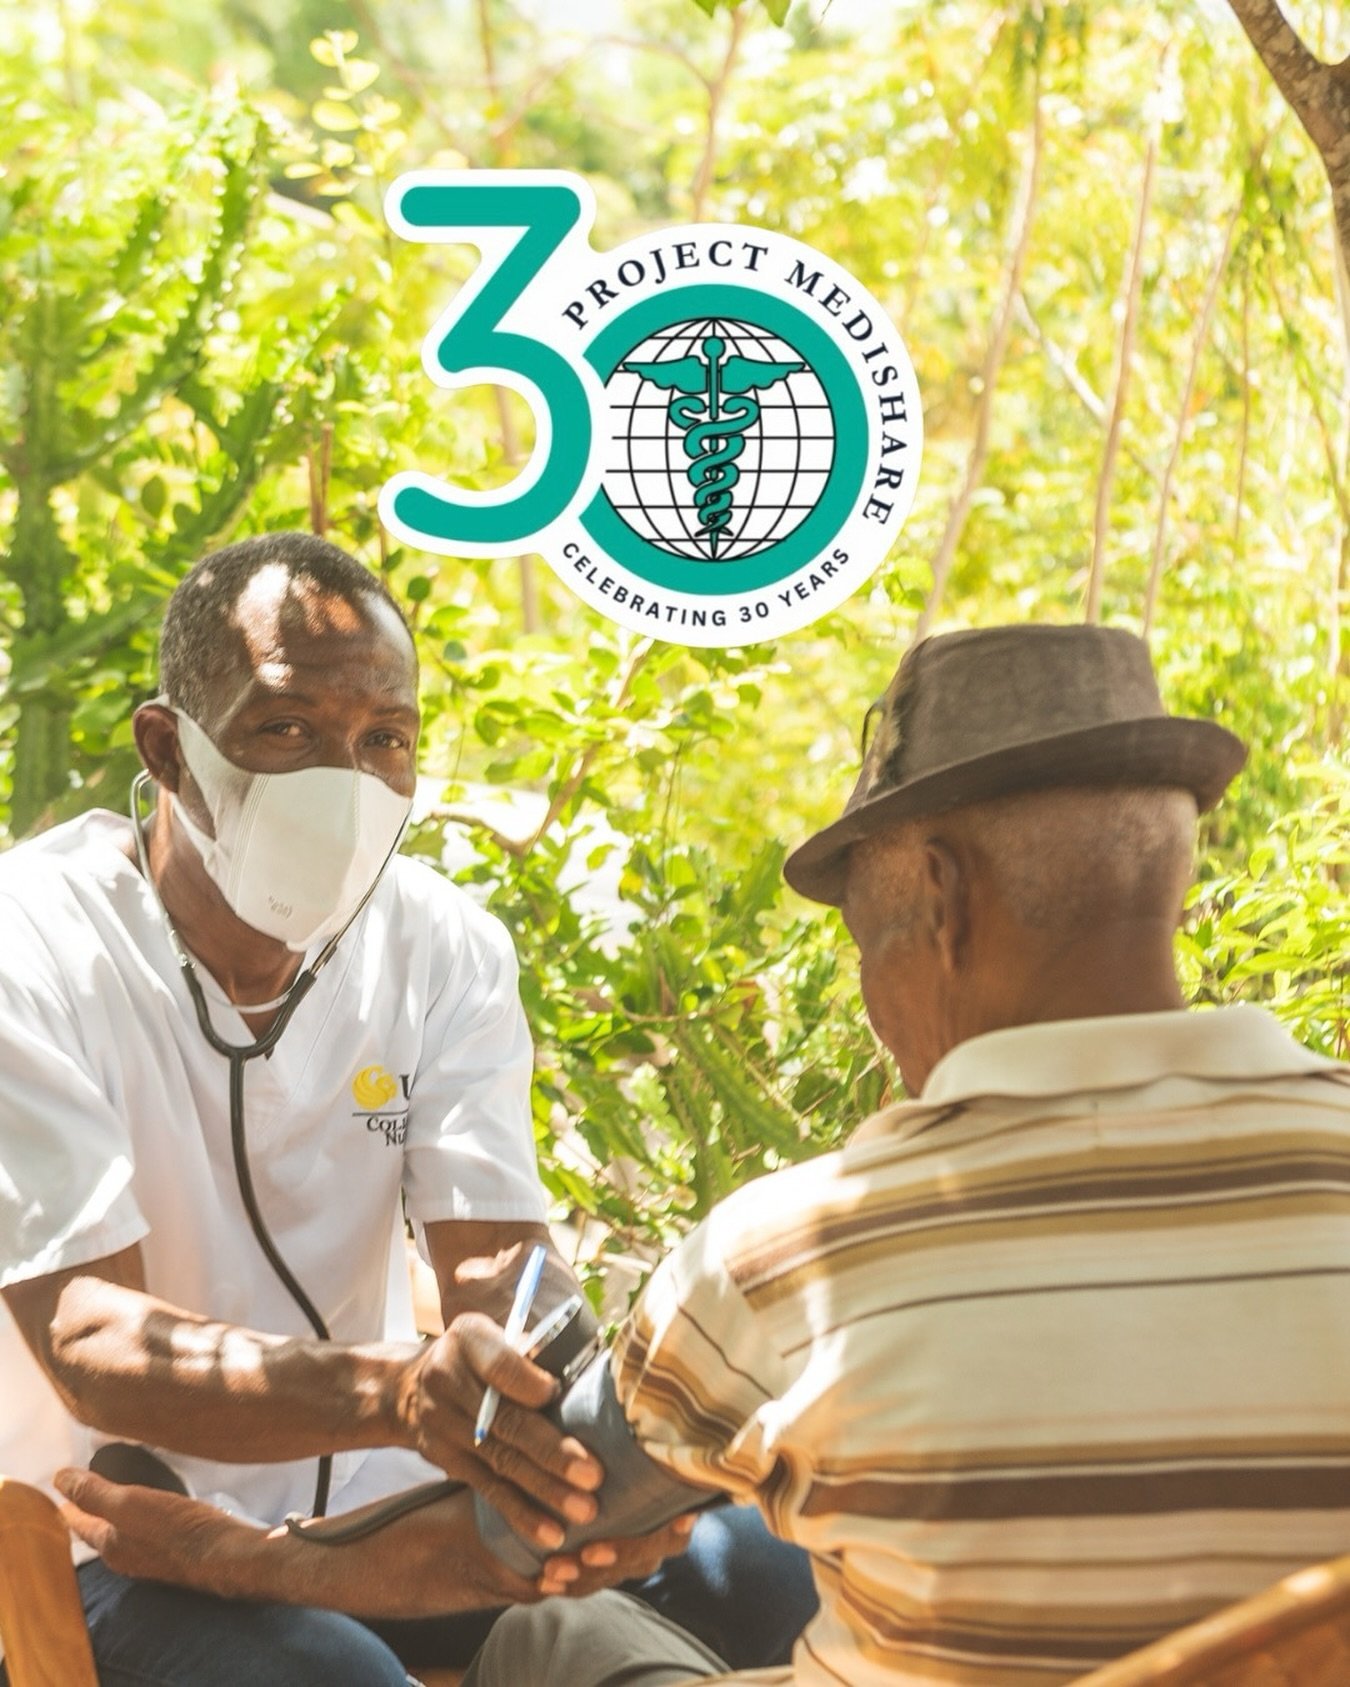 2024 marks Project Medishare&rsquo;s 30th anniversary 🎉 
For three decades our organization has been dedicated to serving the healthcare needs of rural communities in Haiti. Our programs provide lifesaving services to mothers, babies, children &amp;